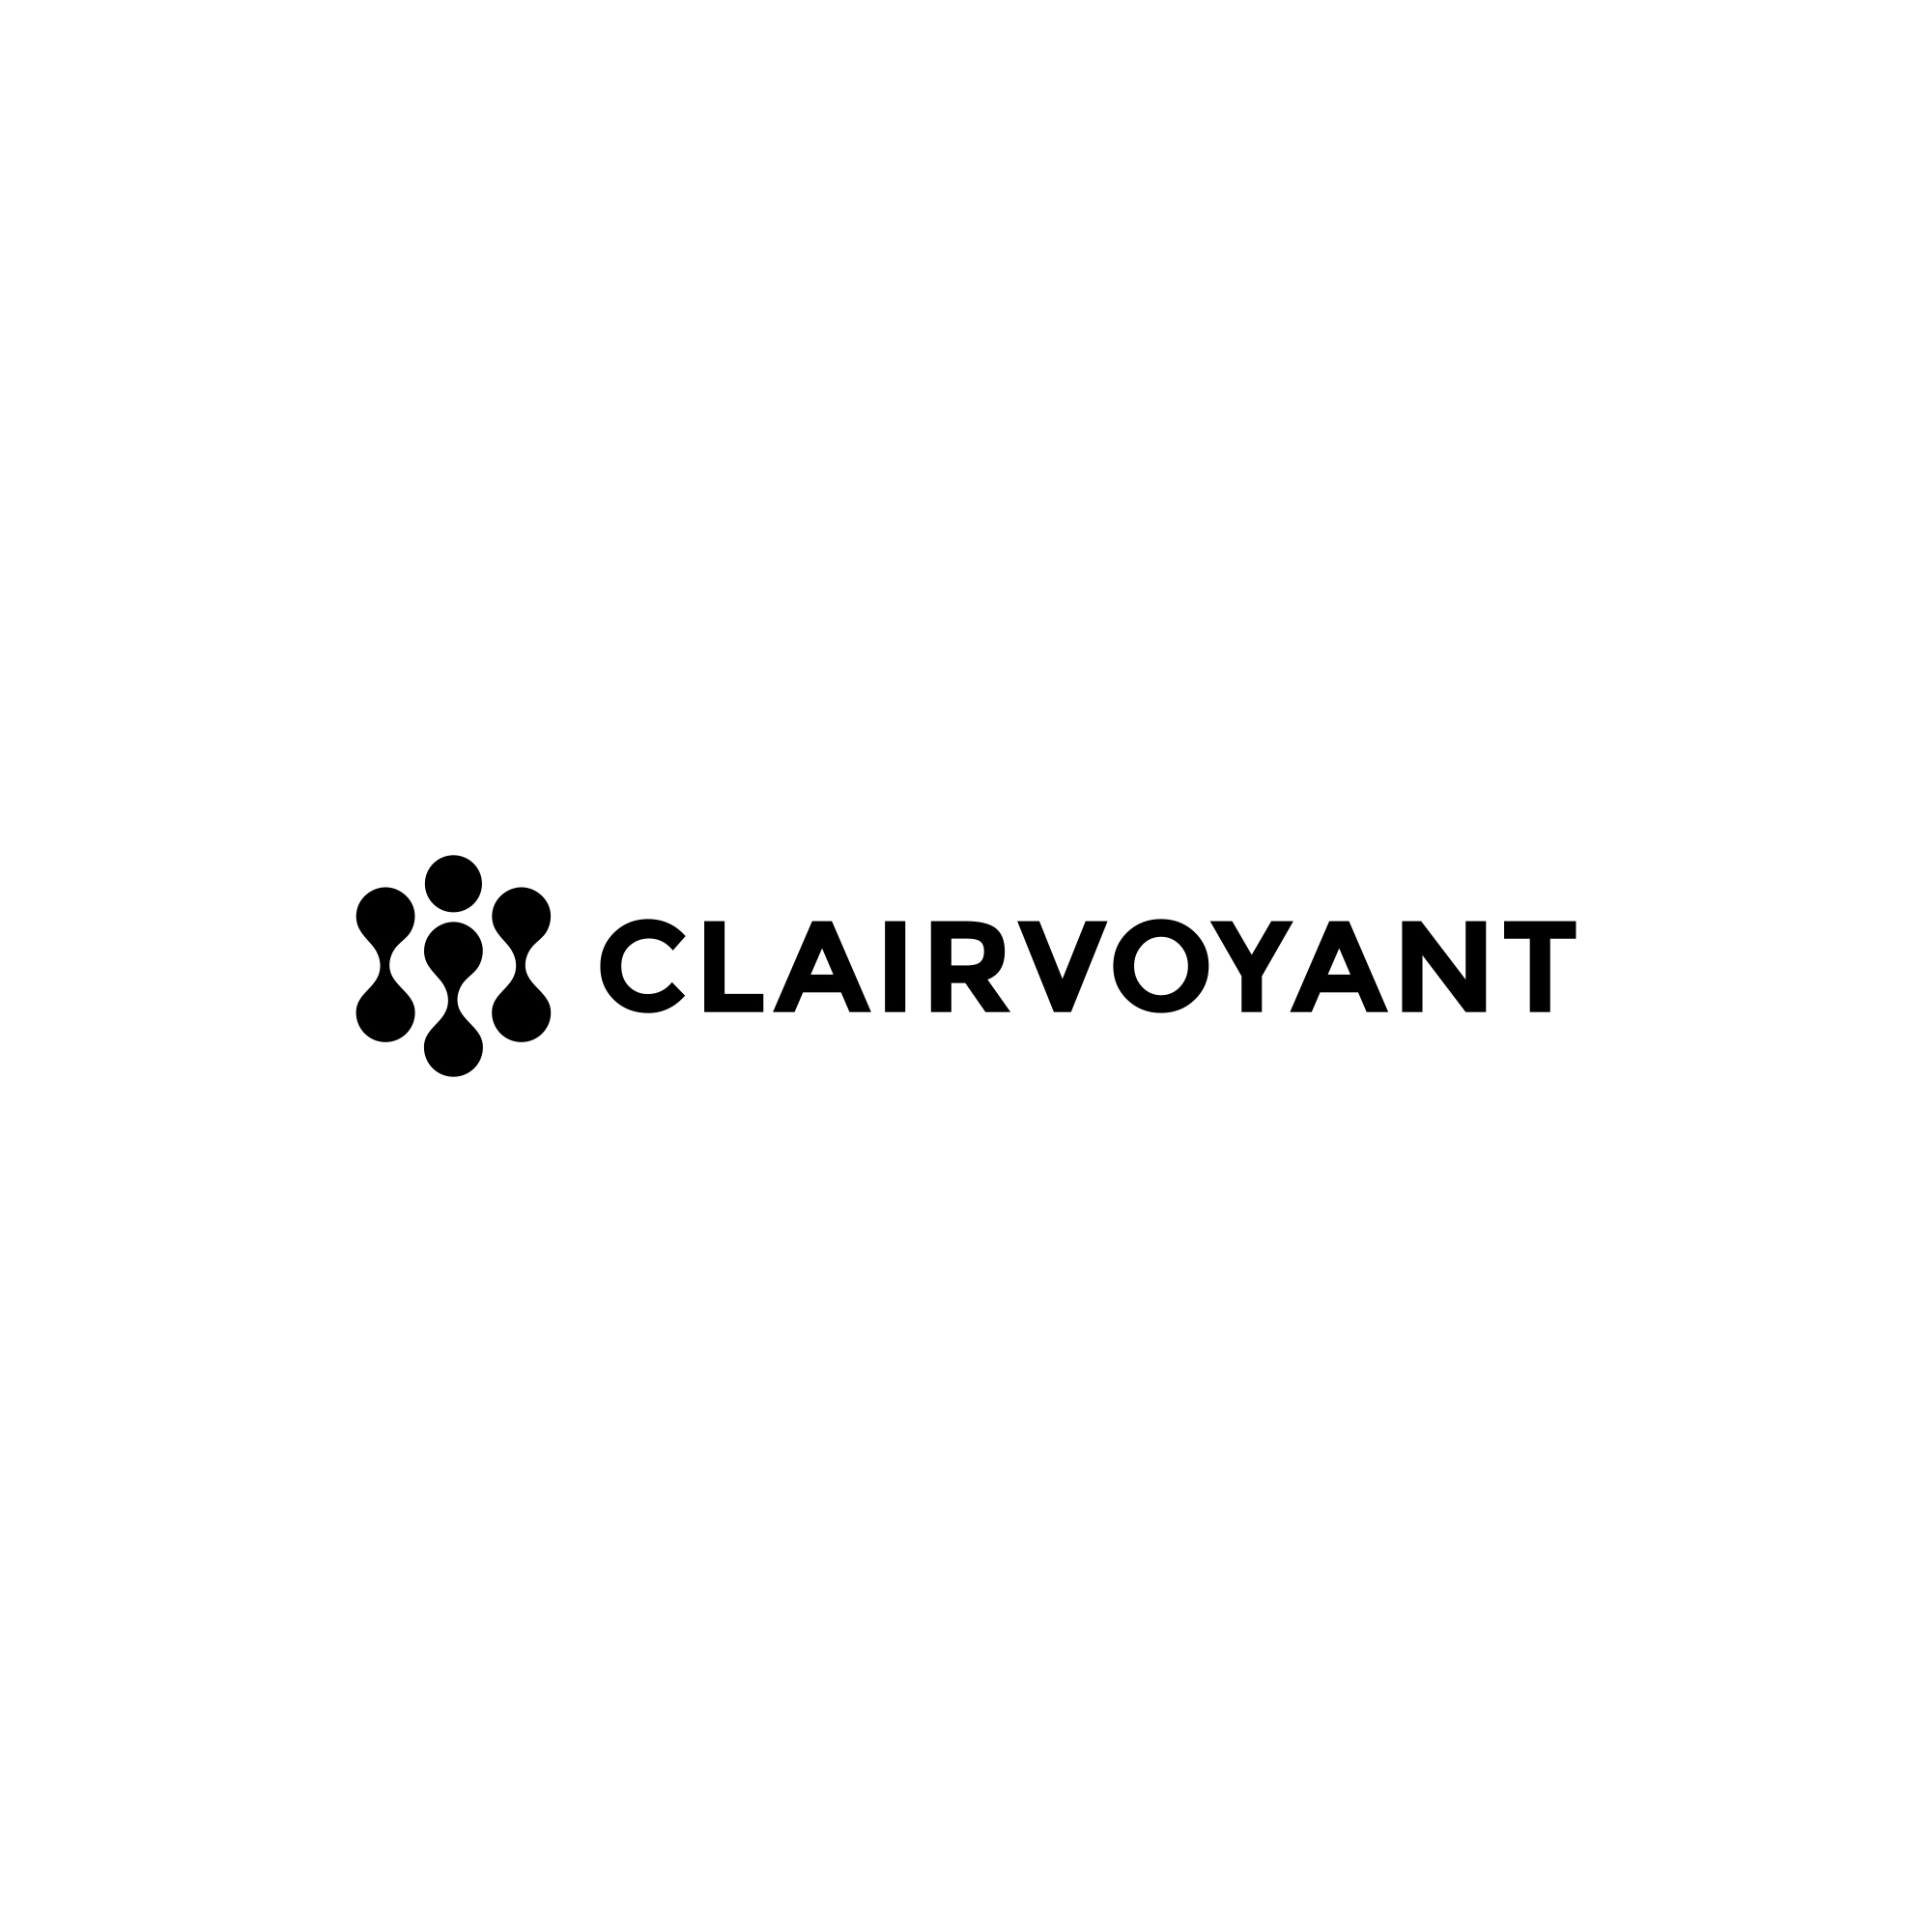 Clairvoyant Therapeutics, Thursday, January 20, 2022, Press release picture